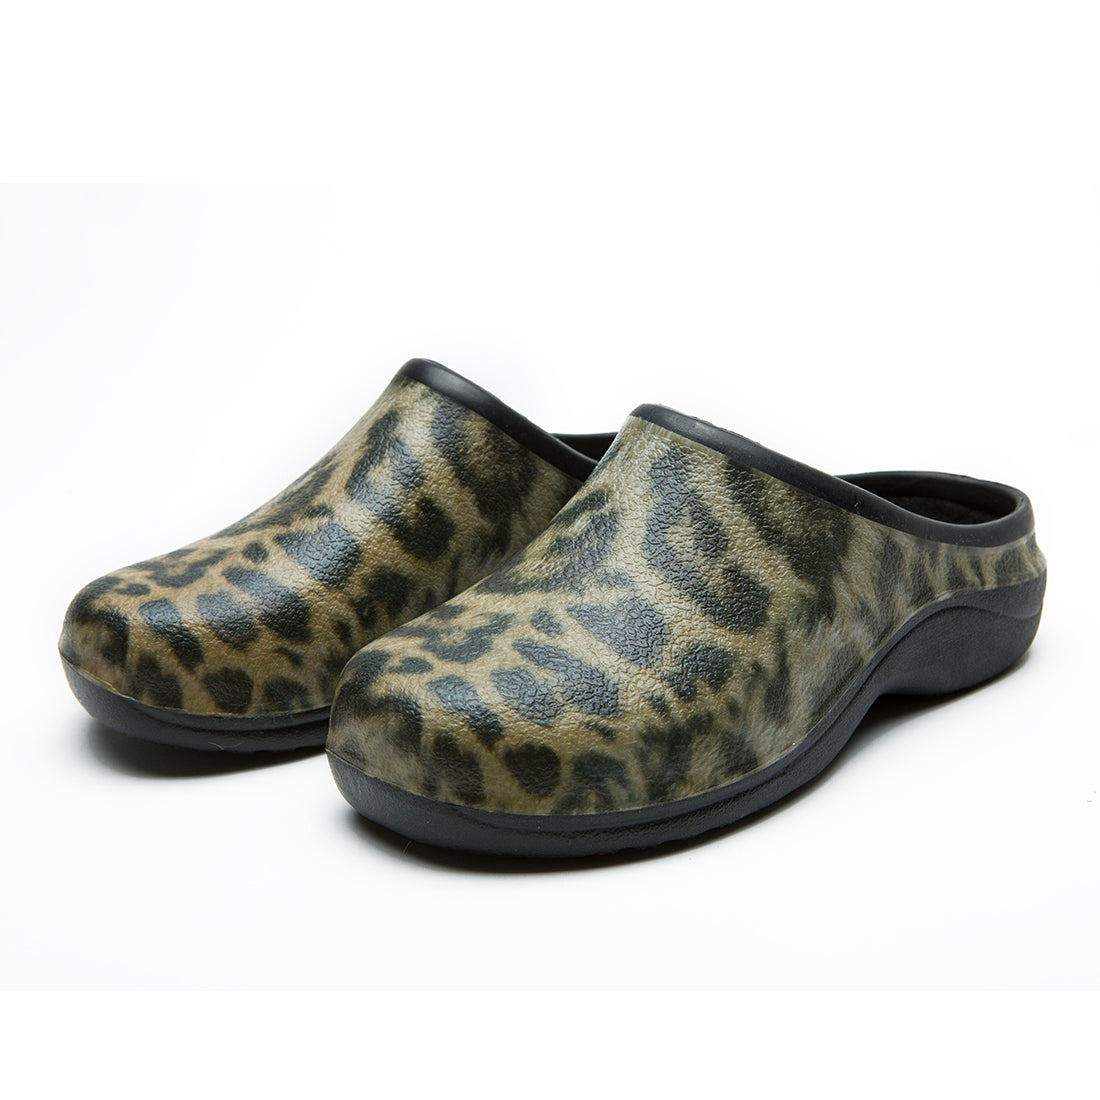 Leopard Garden Clogs Backdoorshoes® - CLEARANCE available in UK sizes 4,5 &amp; 7 only